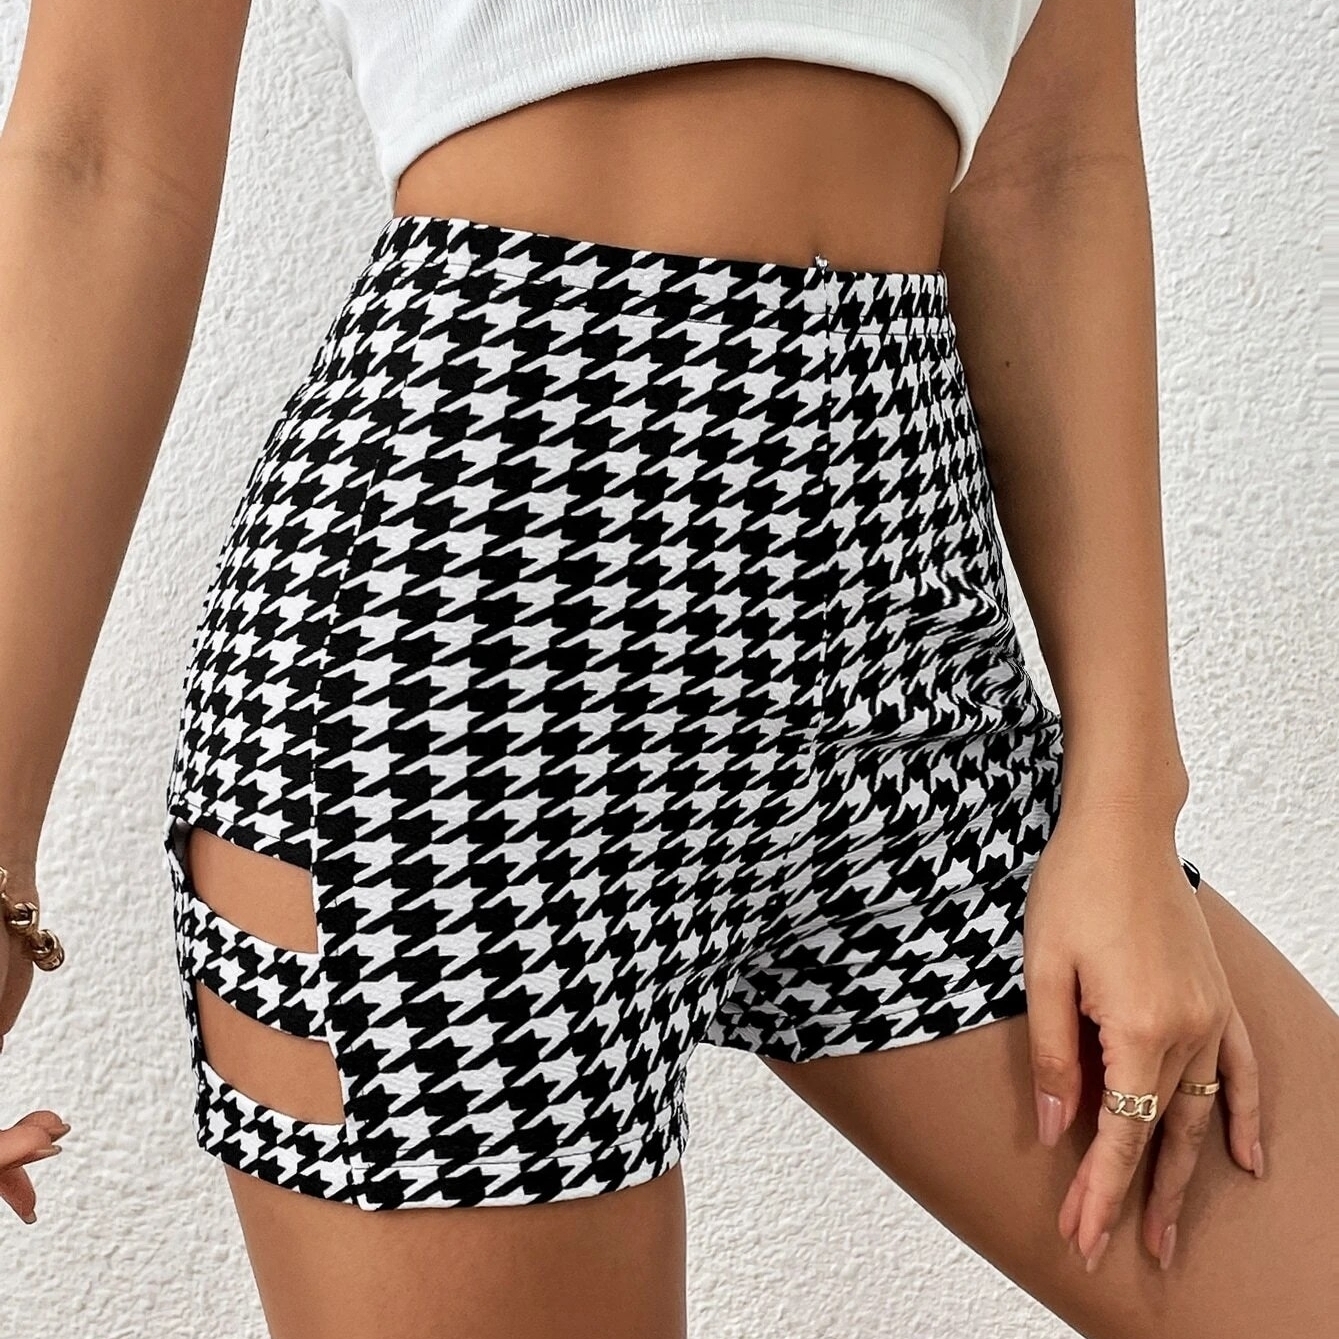 Houndstooth Print Cut Out Side Shorts - Xl